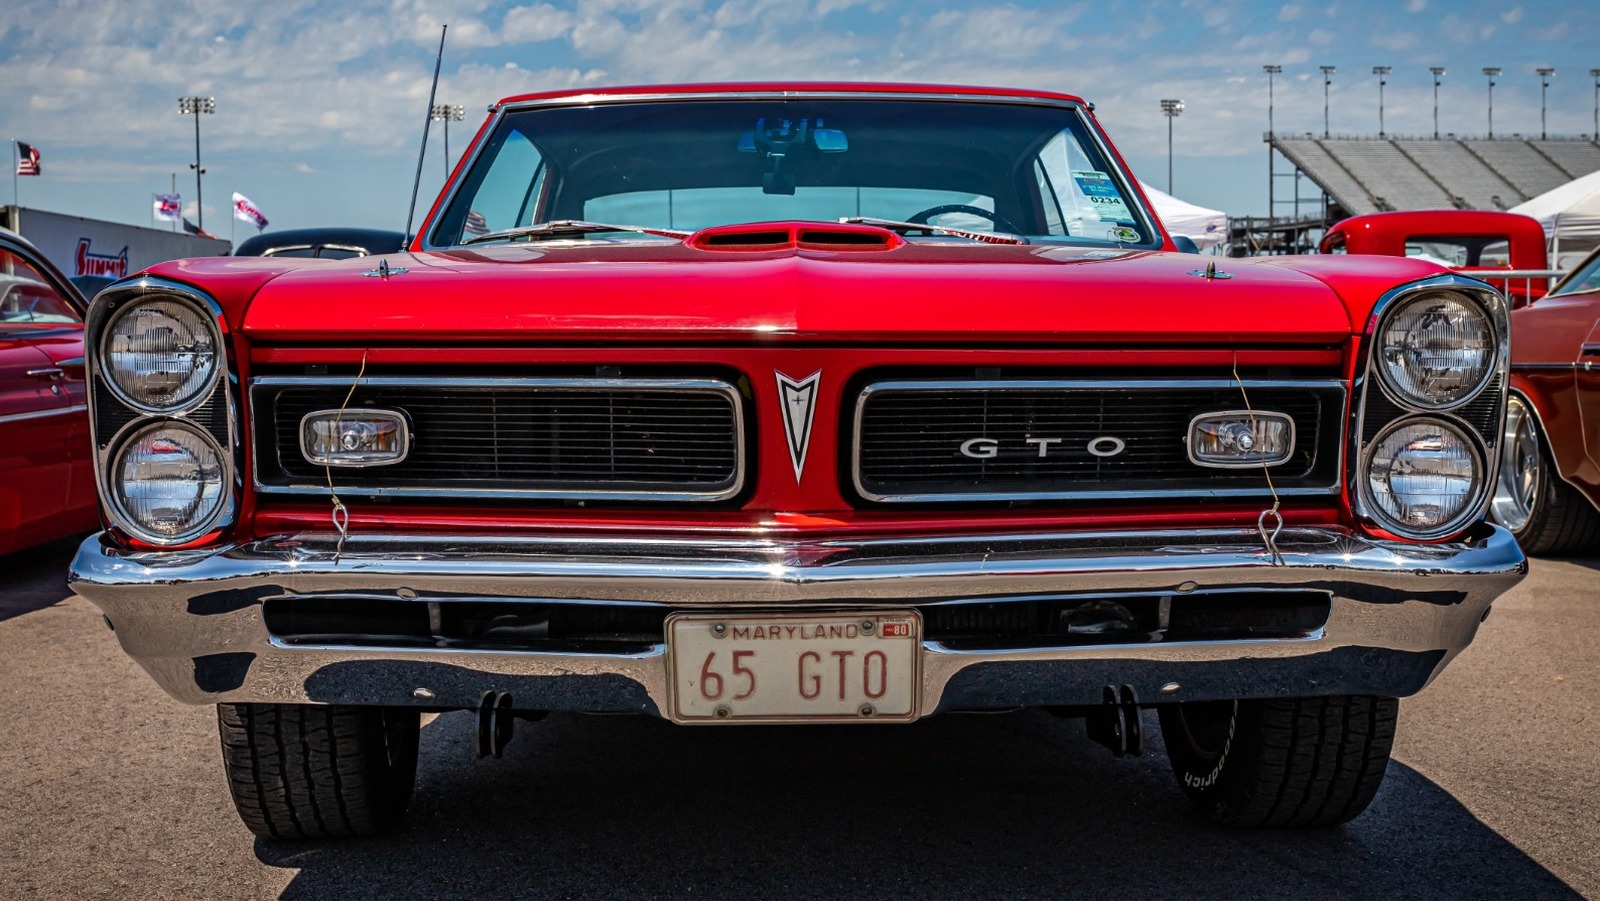 The Coolest Facts You Should Know About The Pontiac GTO